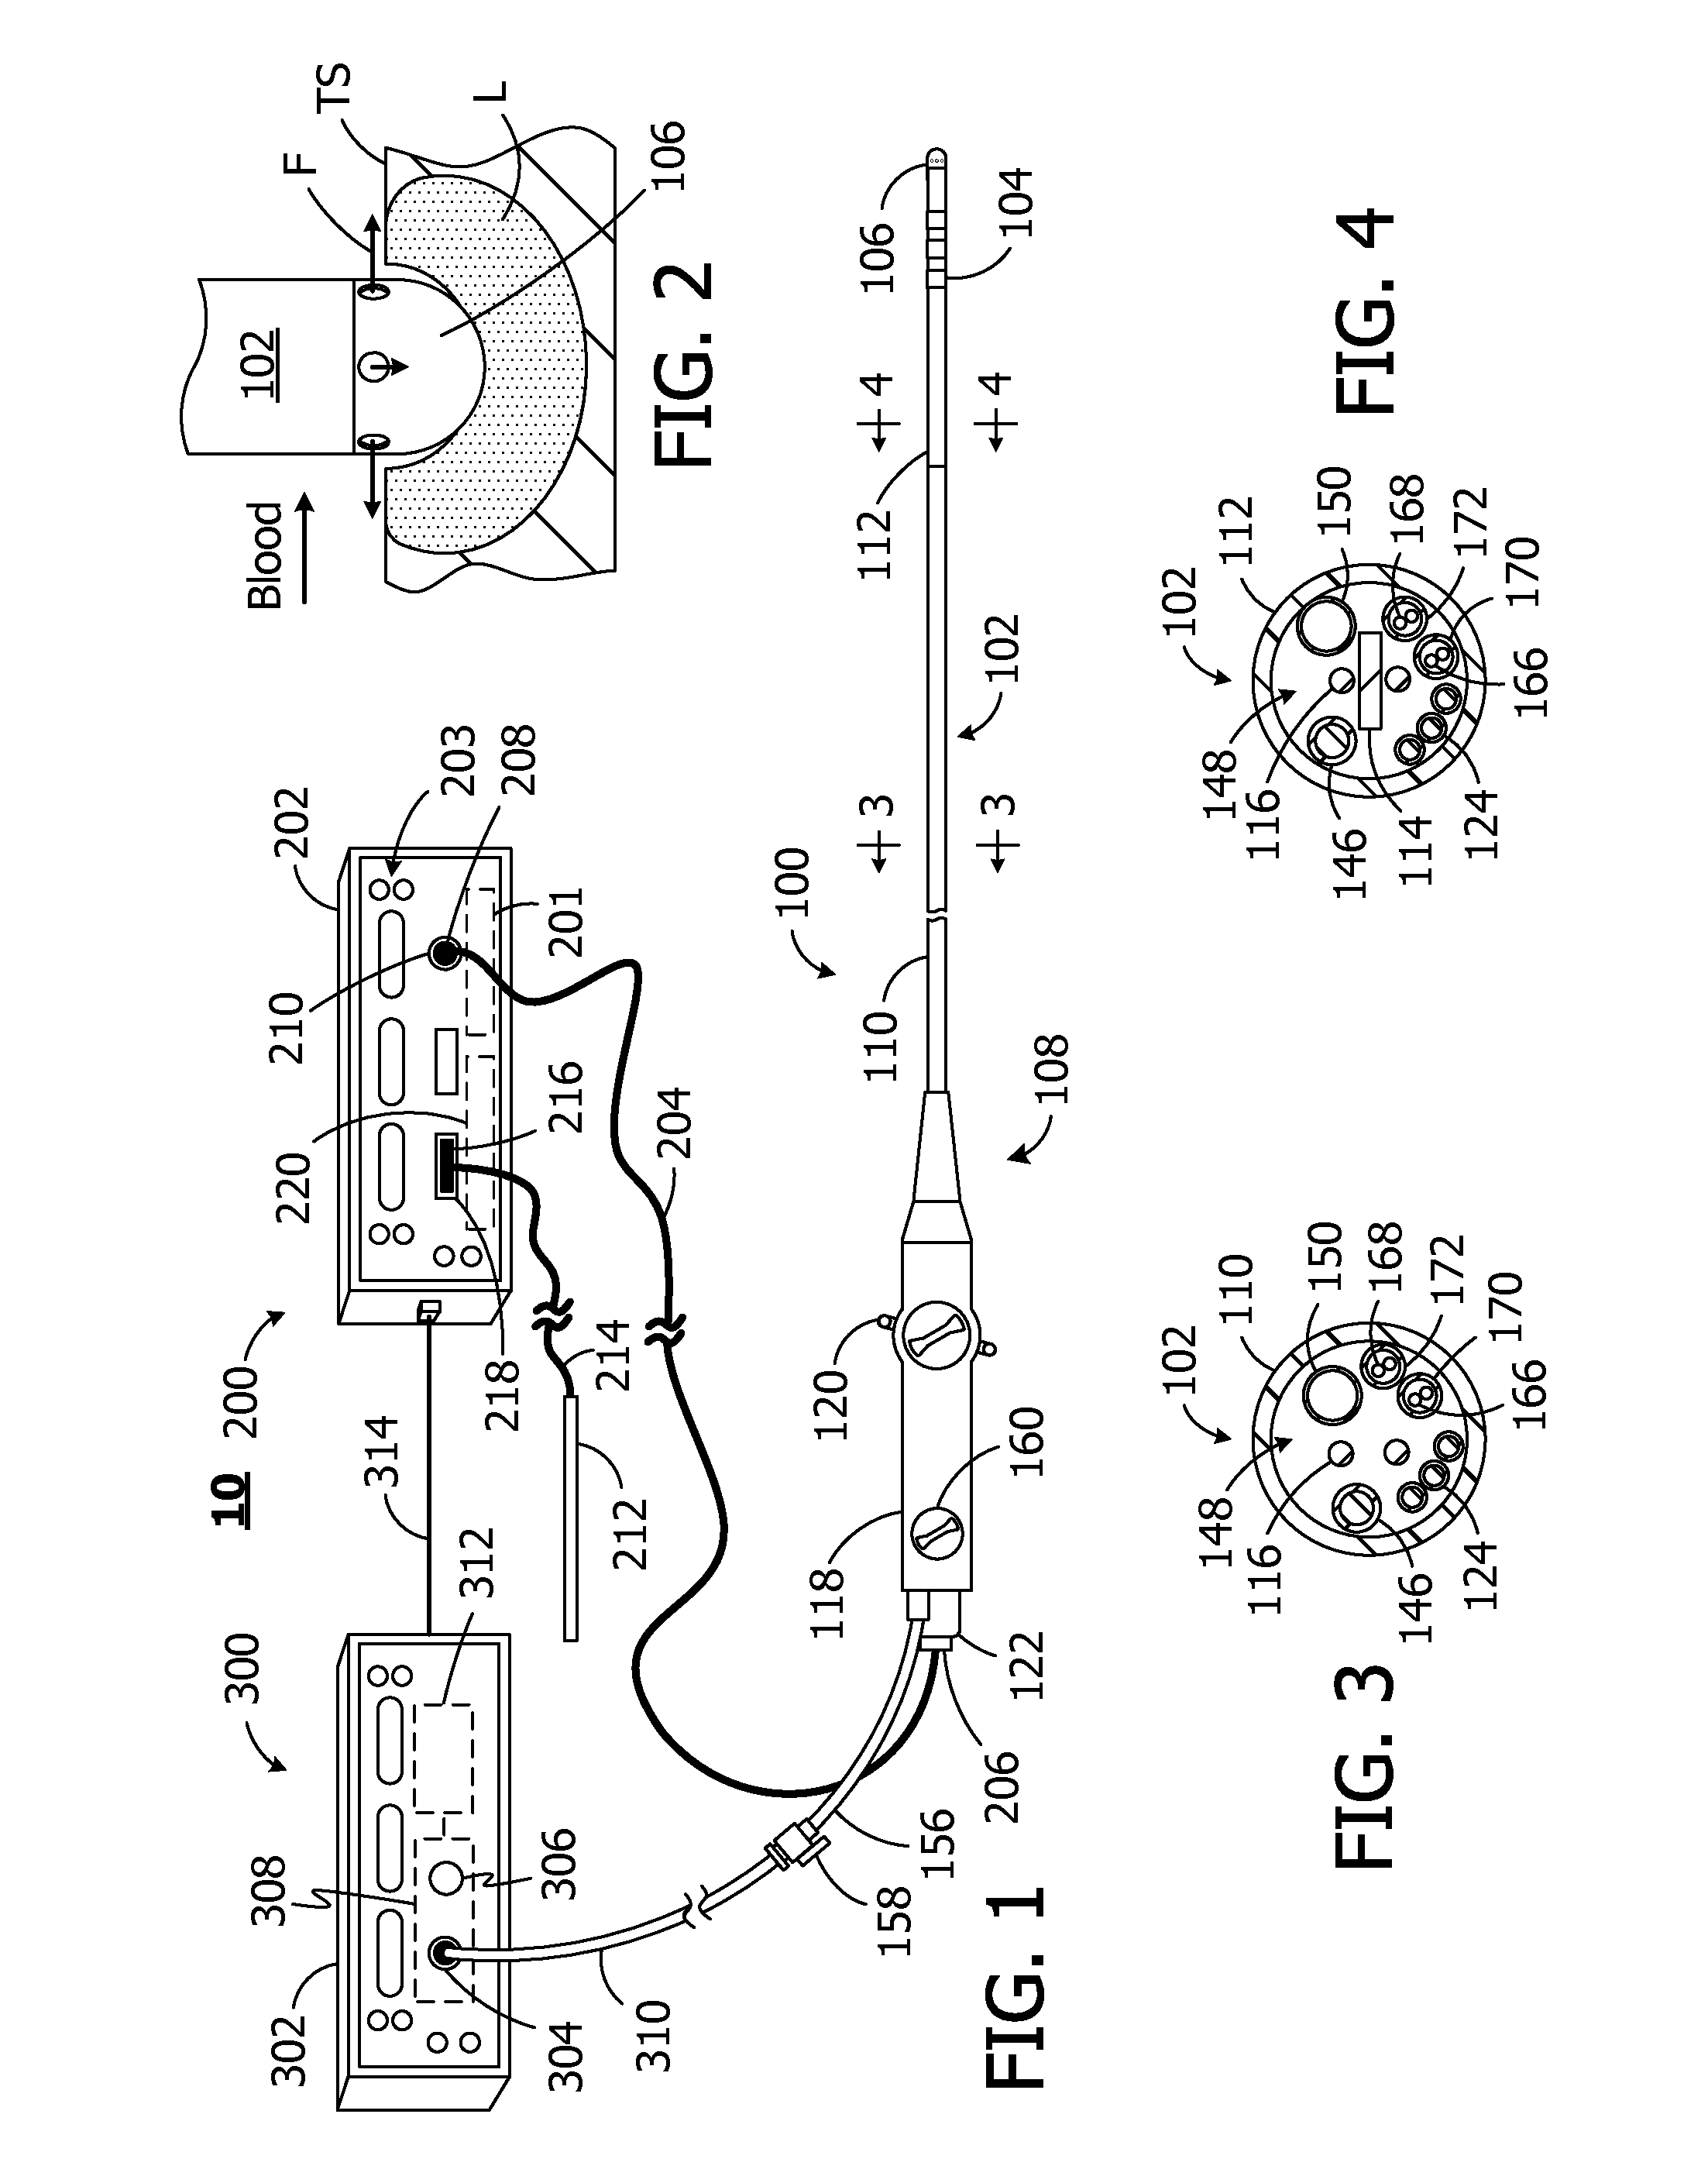 Apparatus and methods for fluid cooled electrophysiology procedures